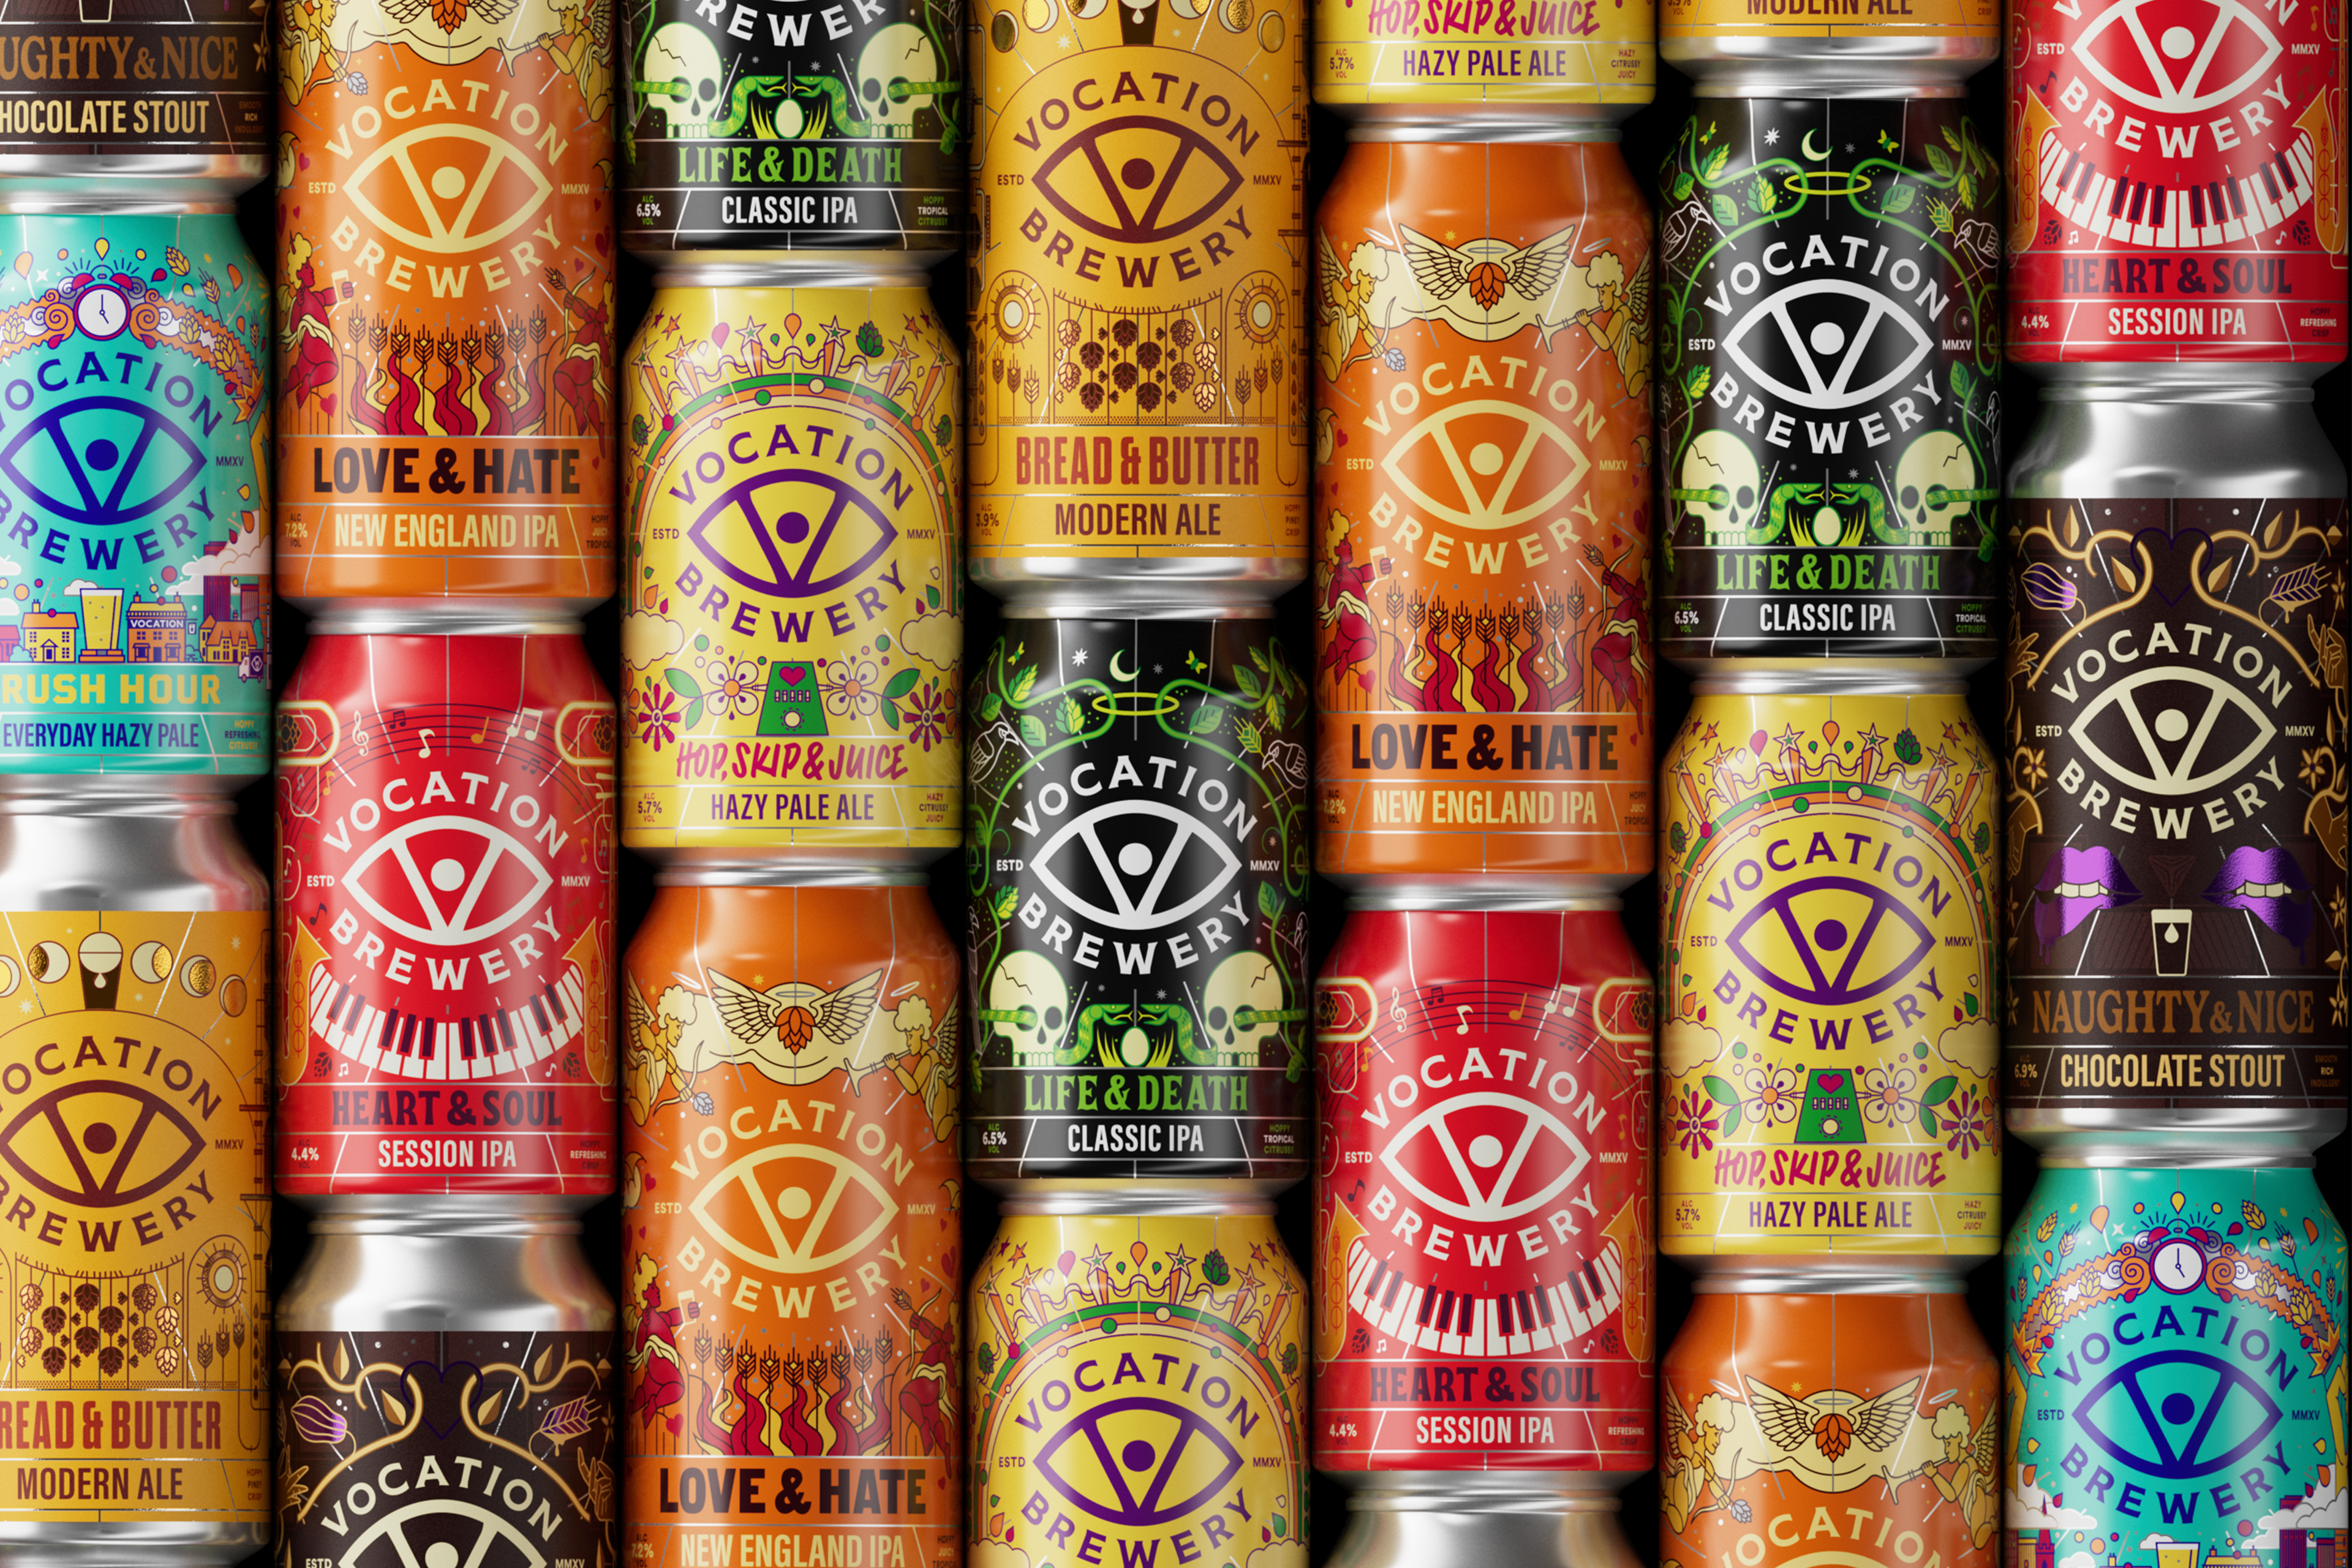 Turner Duckworth Gave Vocation Brewery Fun, Psychedelic Designs Perfect for Entertaining a Buzz